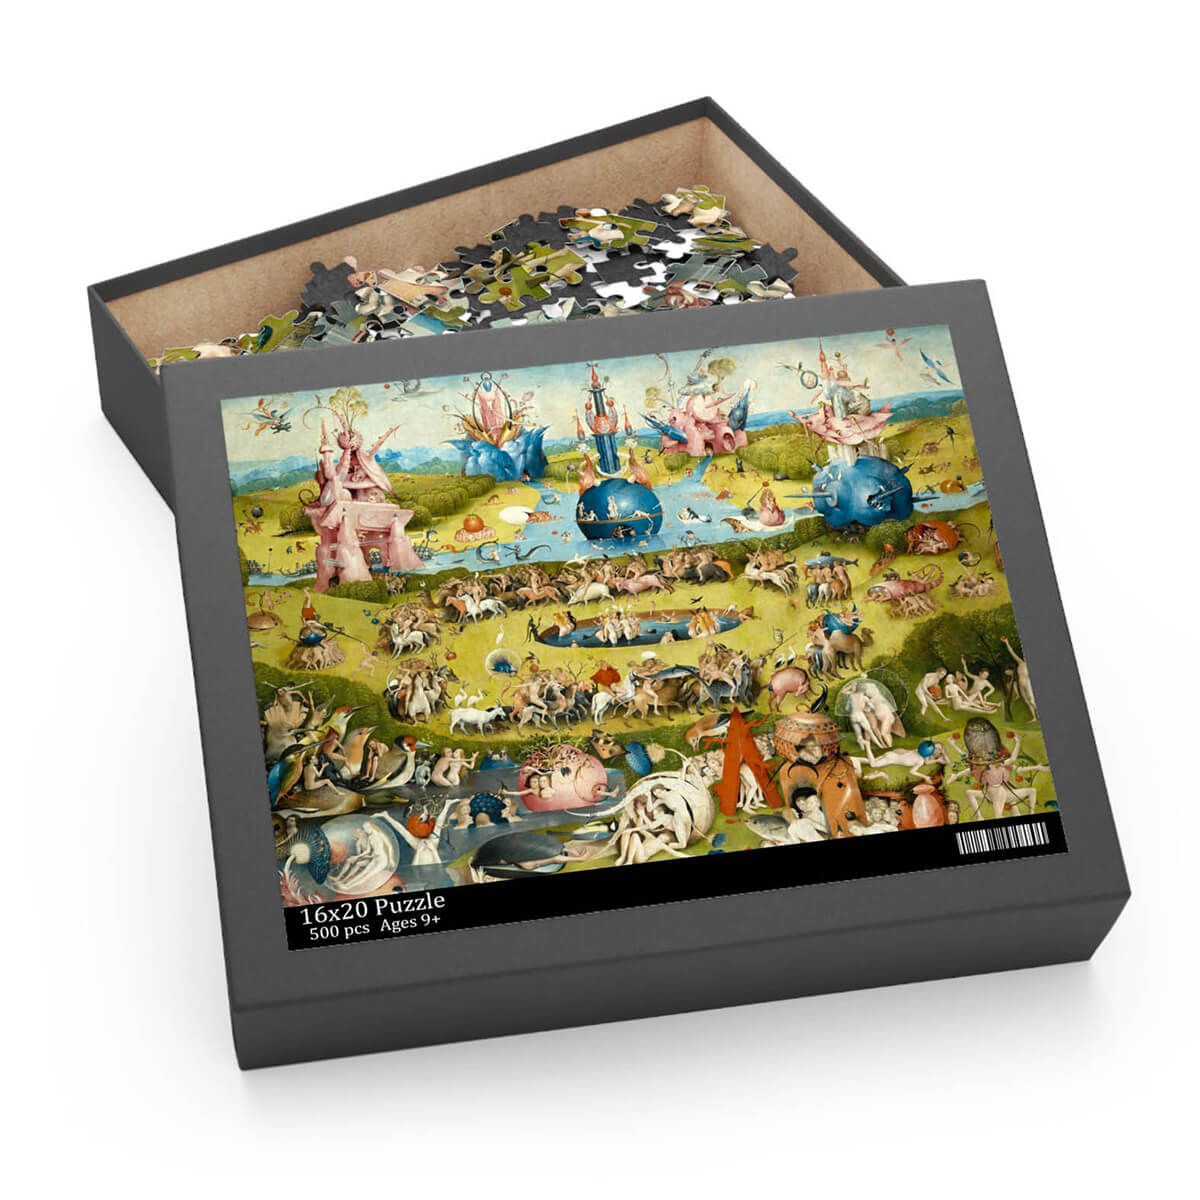 Hieronymus Bosch The Garden of Earthly Delights Puzzle